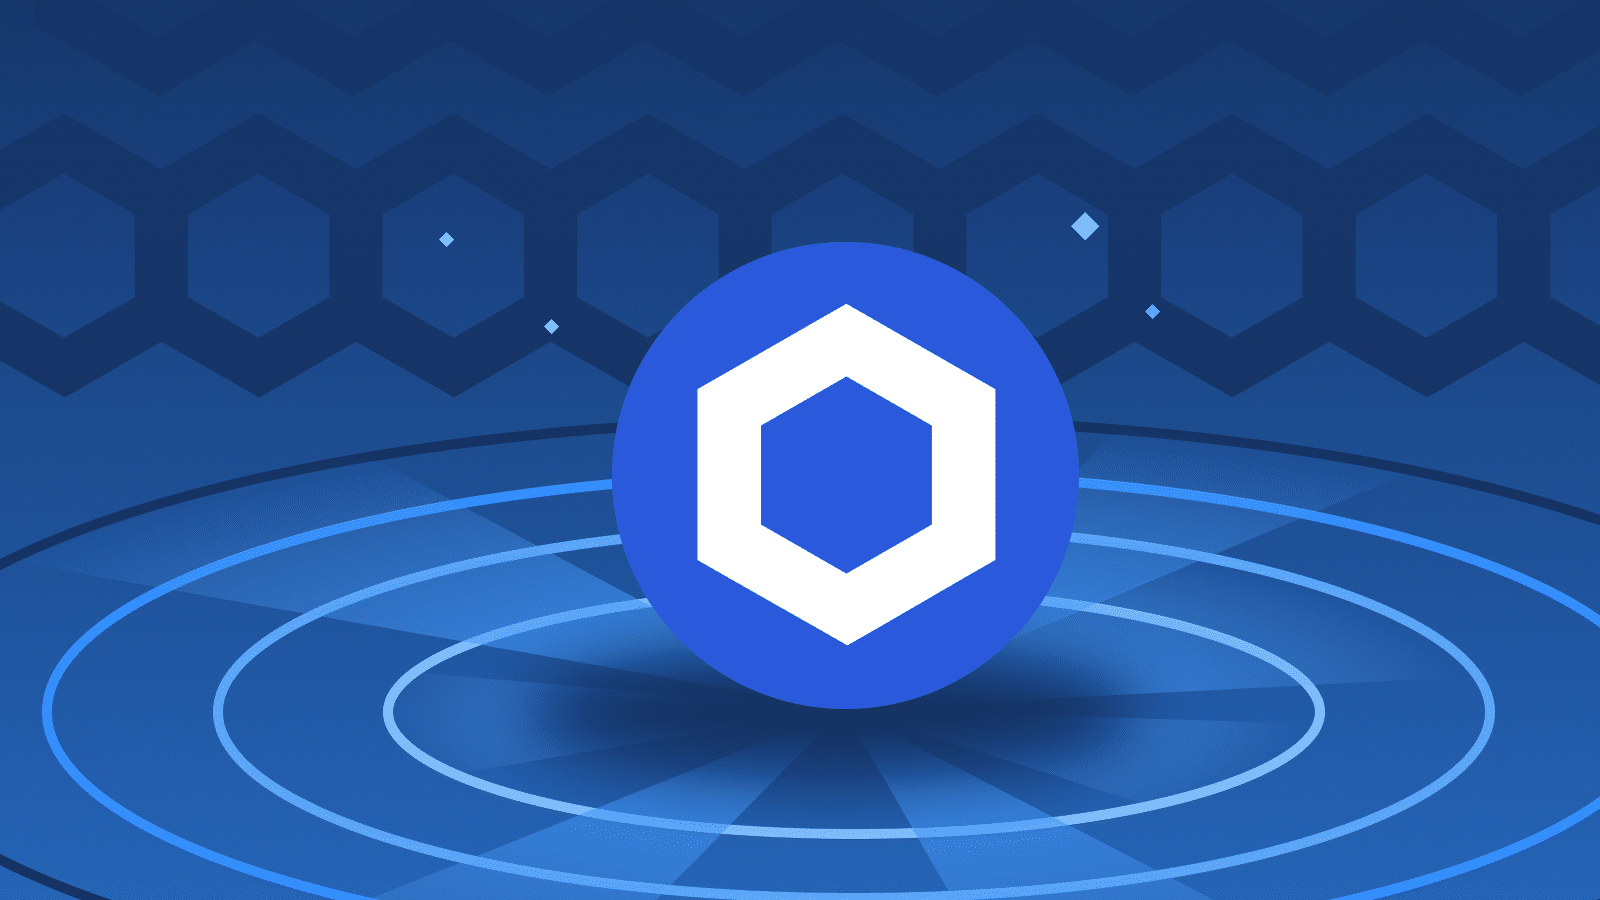 Chainlink Price Prediction: LINK Price Surges as Crypto Market Recovers – Bulls Target $20